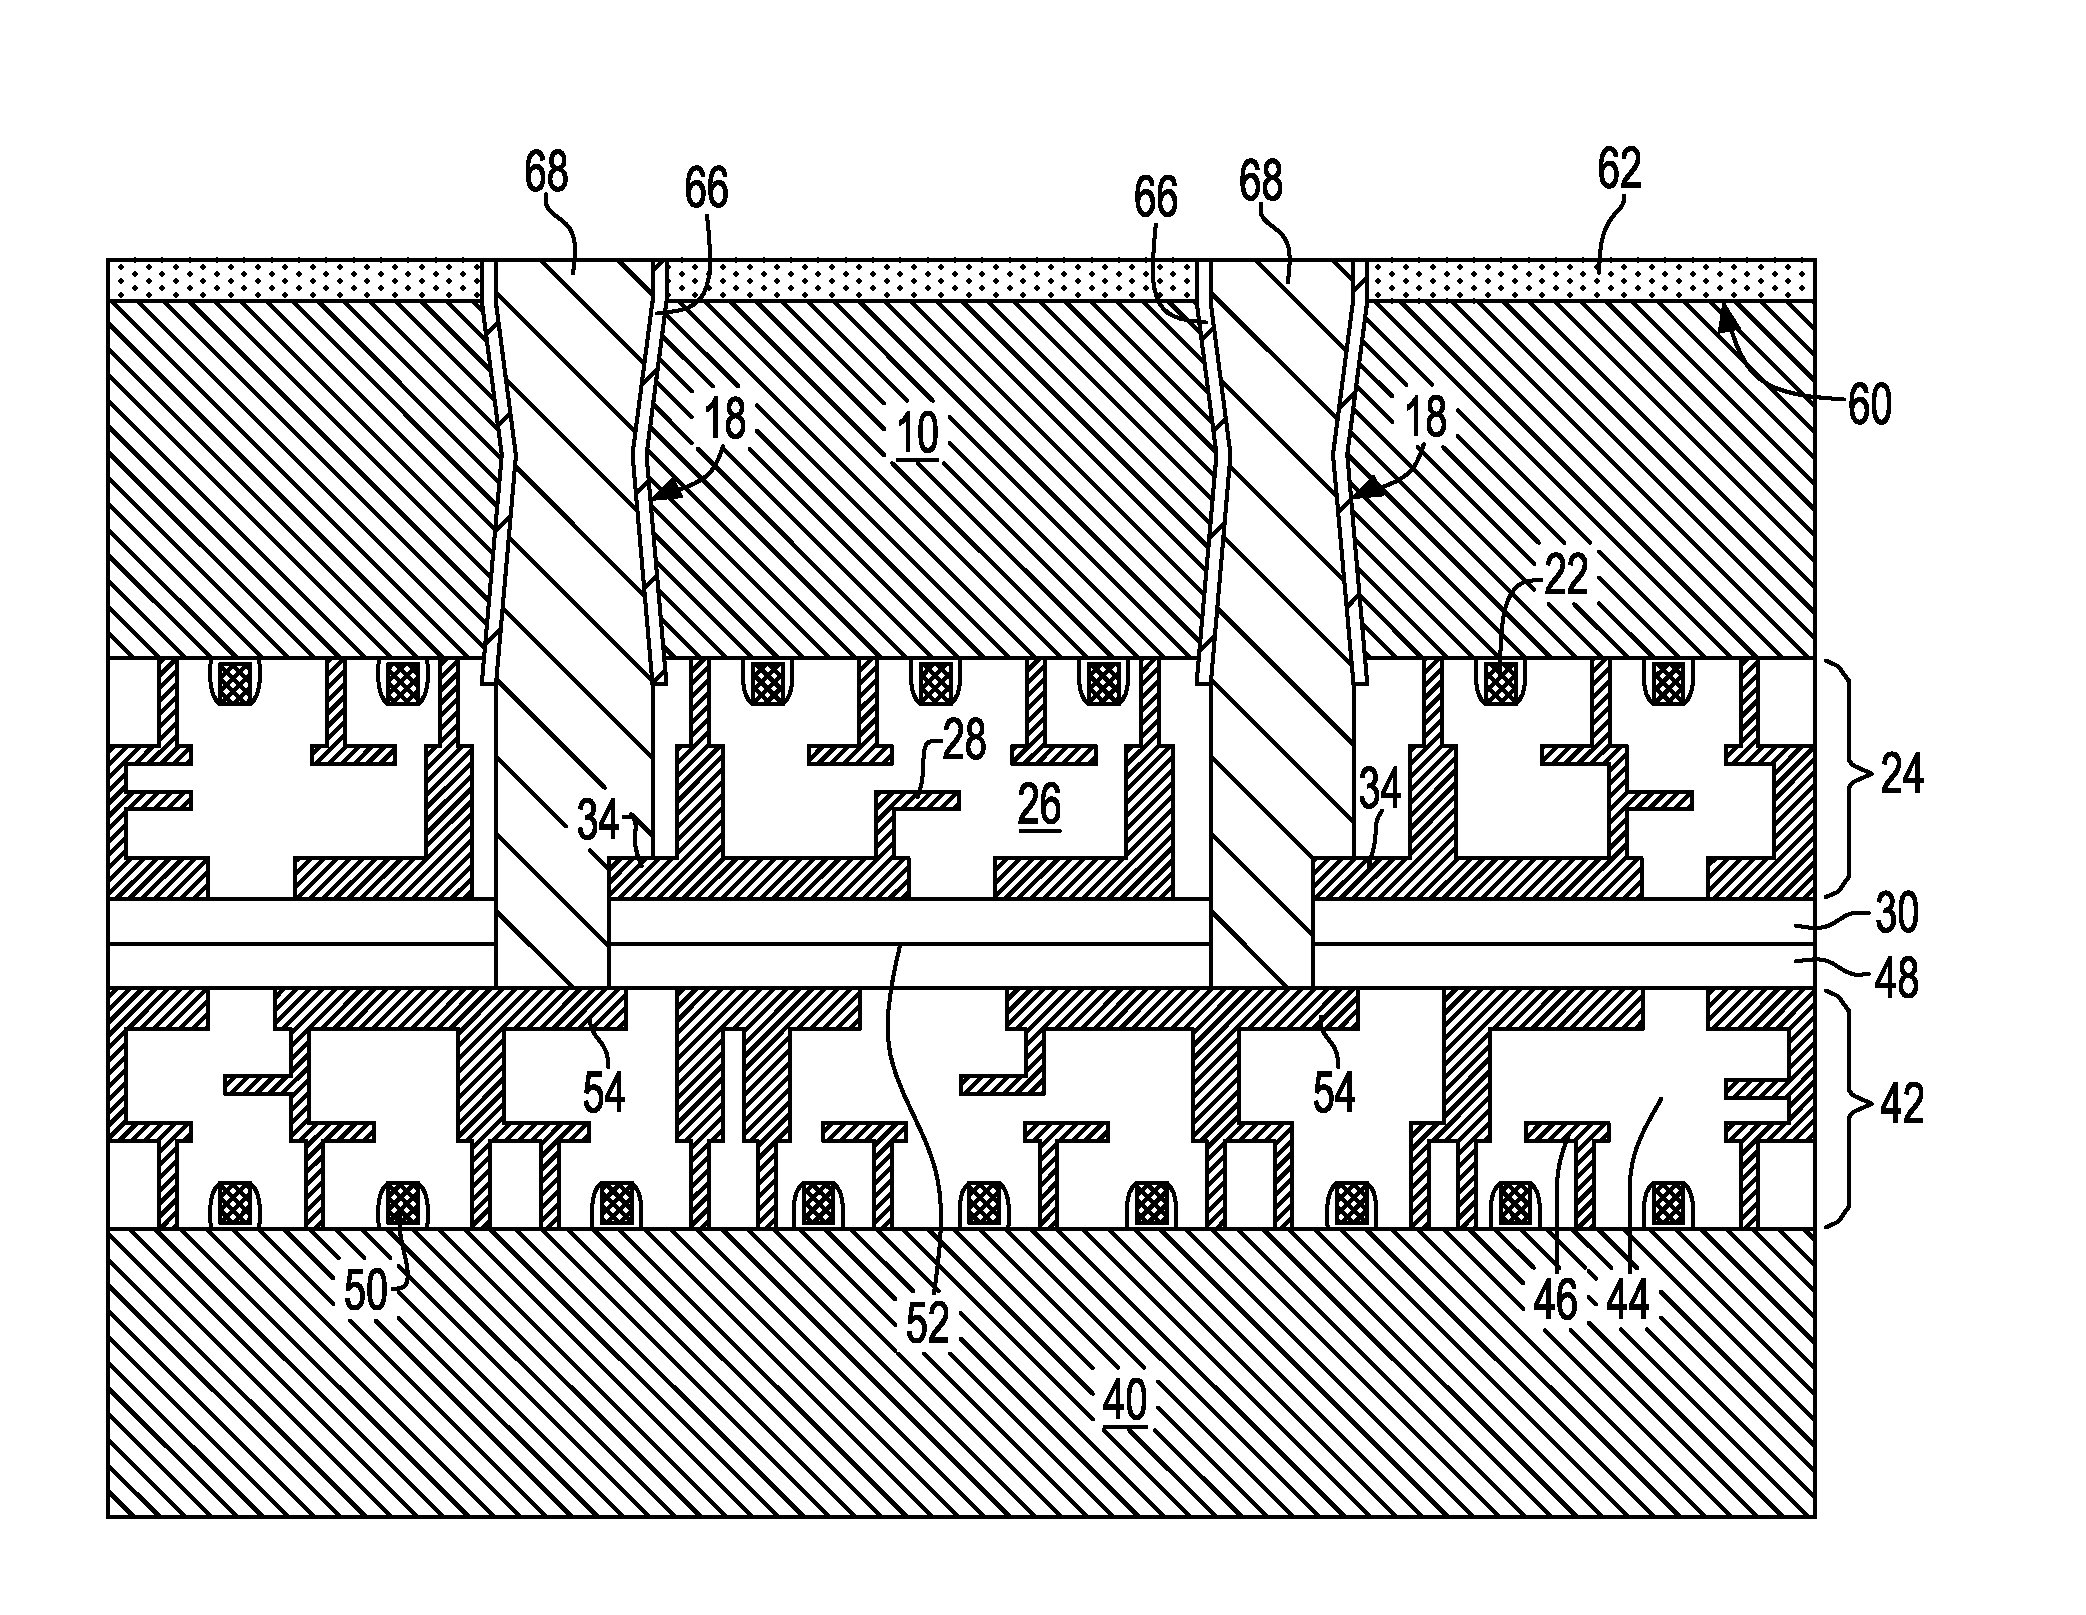 Method of making 3D integrated circuits